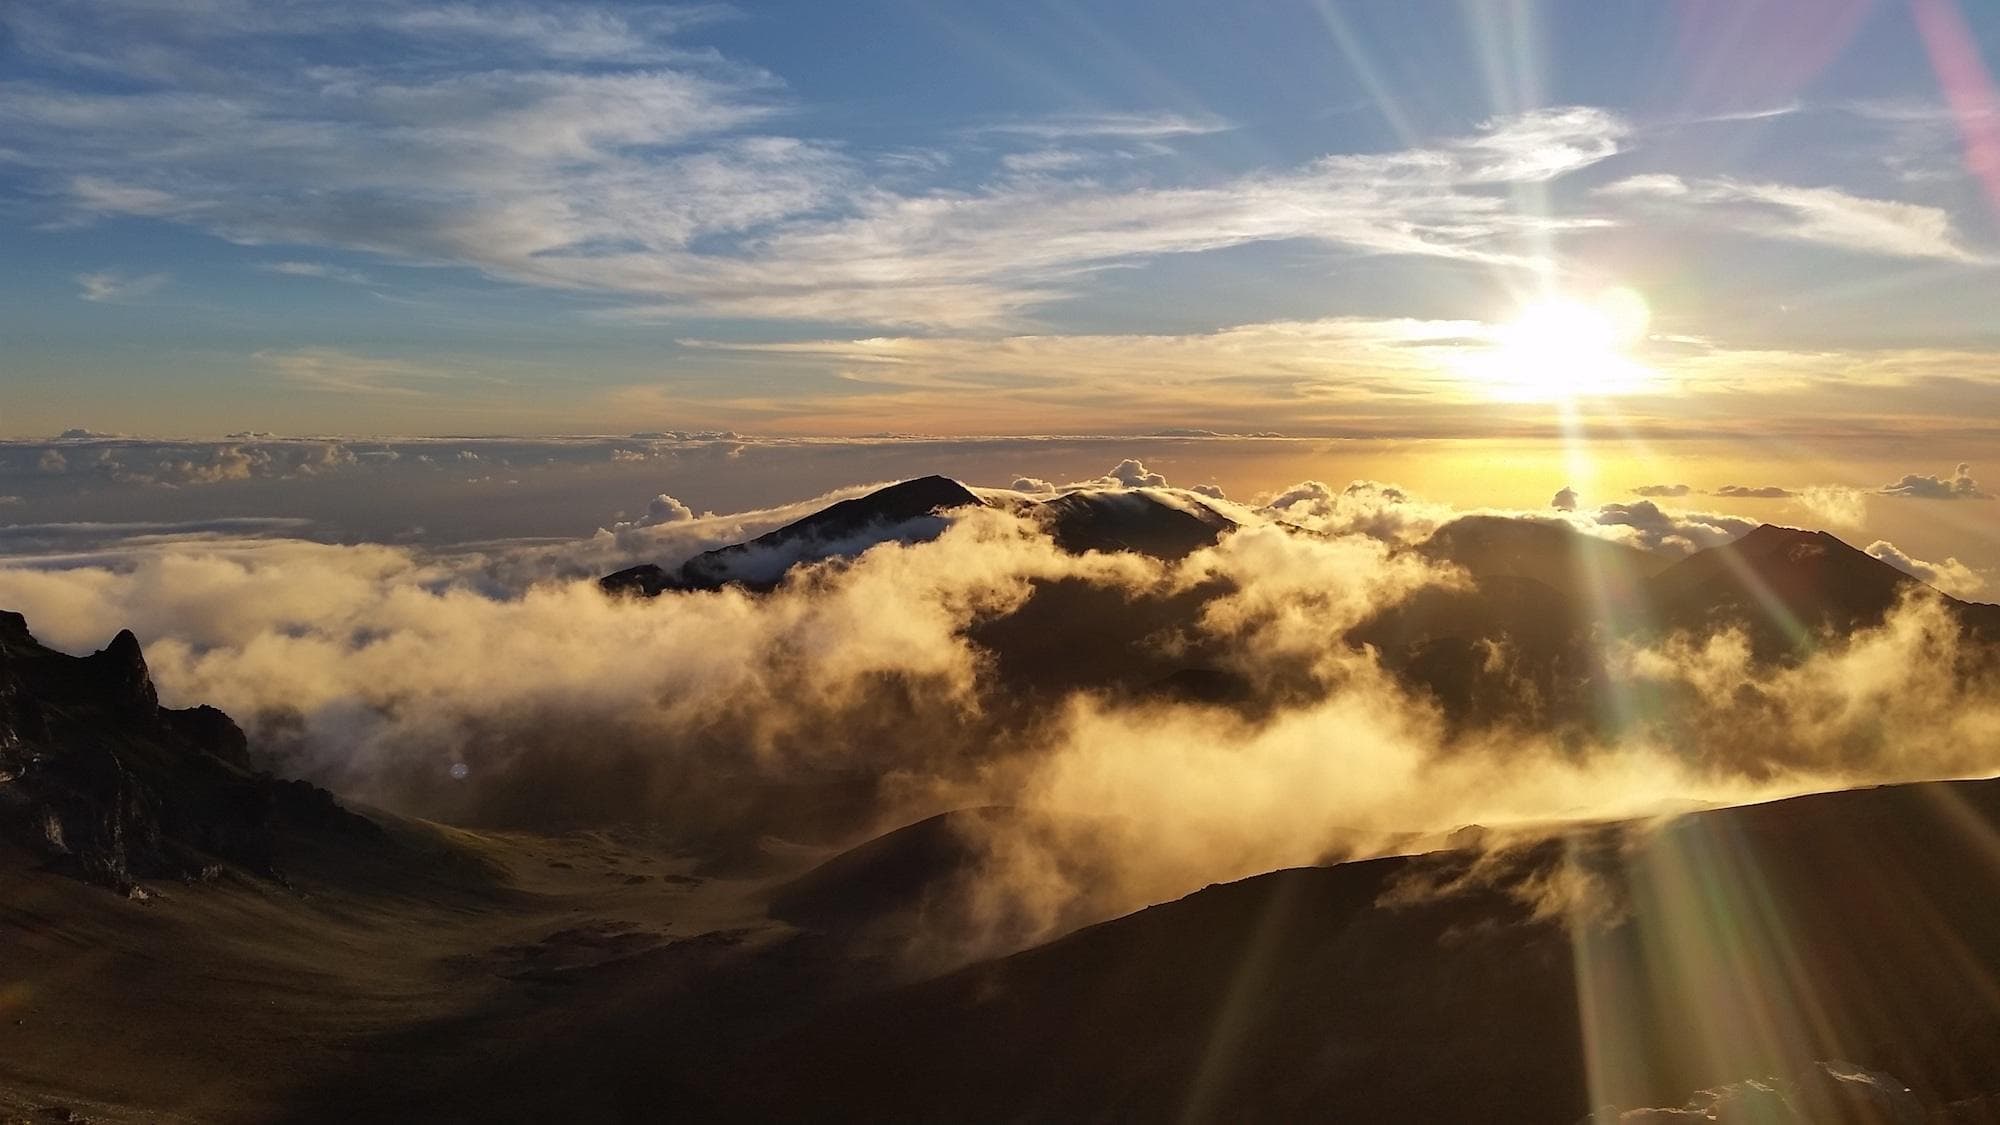 Use our Haleakala National Park guide to plan an adventurous trip to Maui, with helpful info on where to hike, things to do, where to camp/stay on Maui, and the best sites in the National Park.